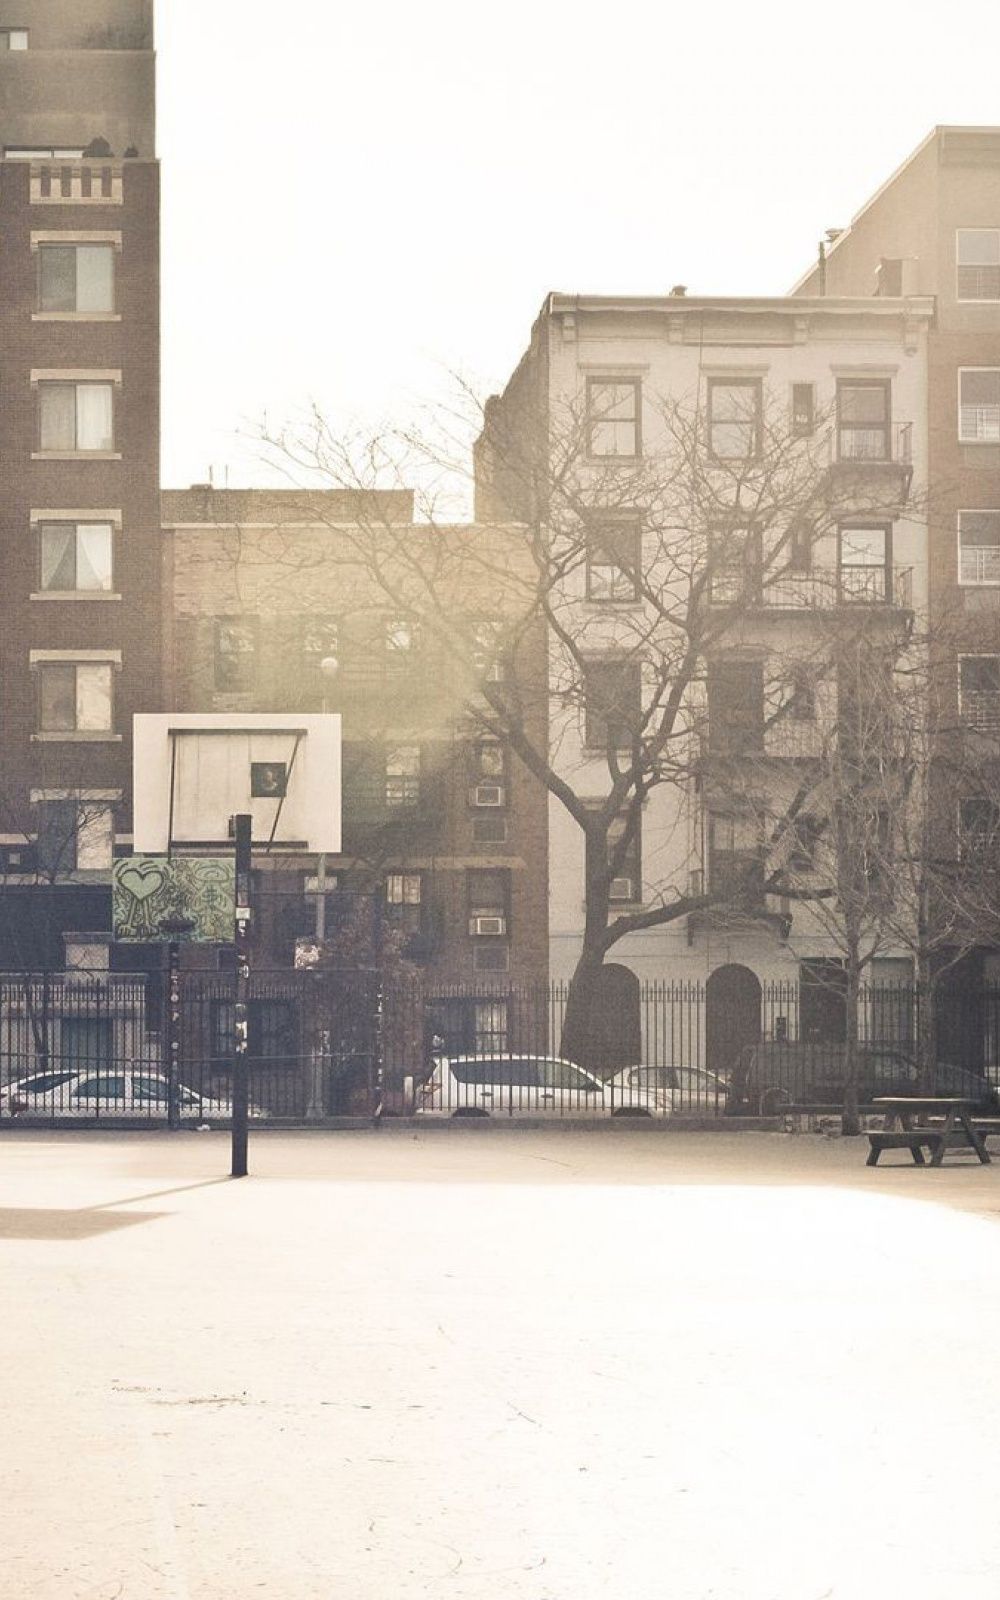 City Basketball Court Android Wallpaper free download